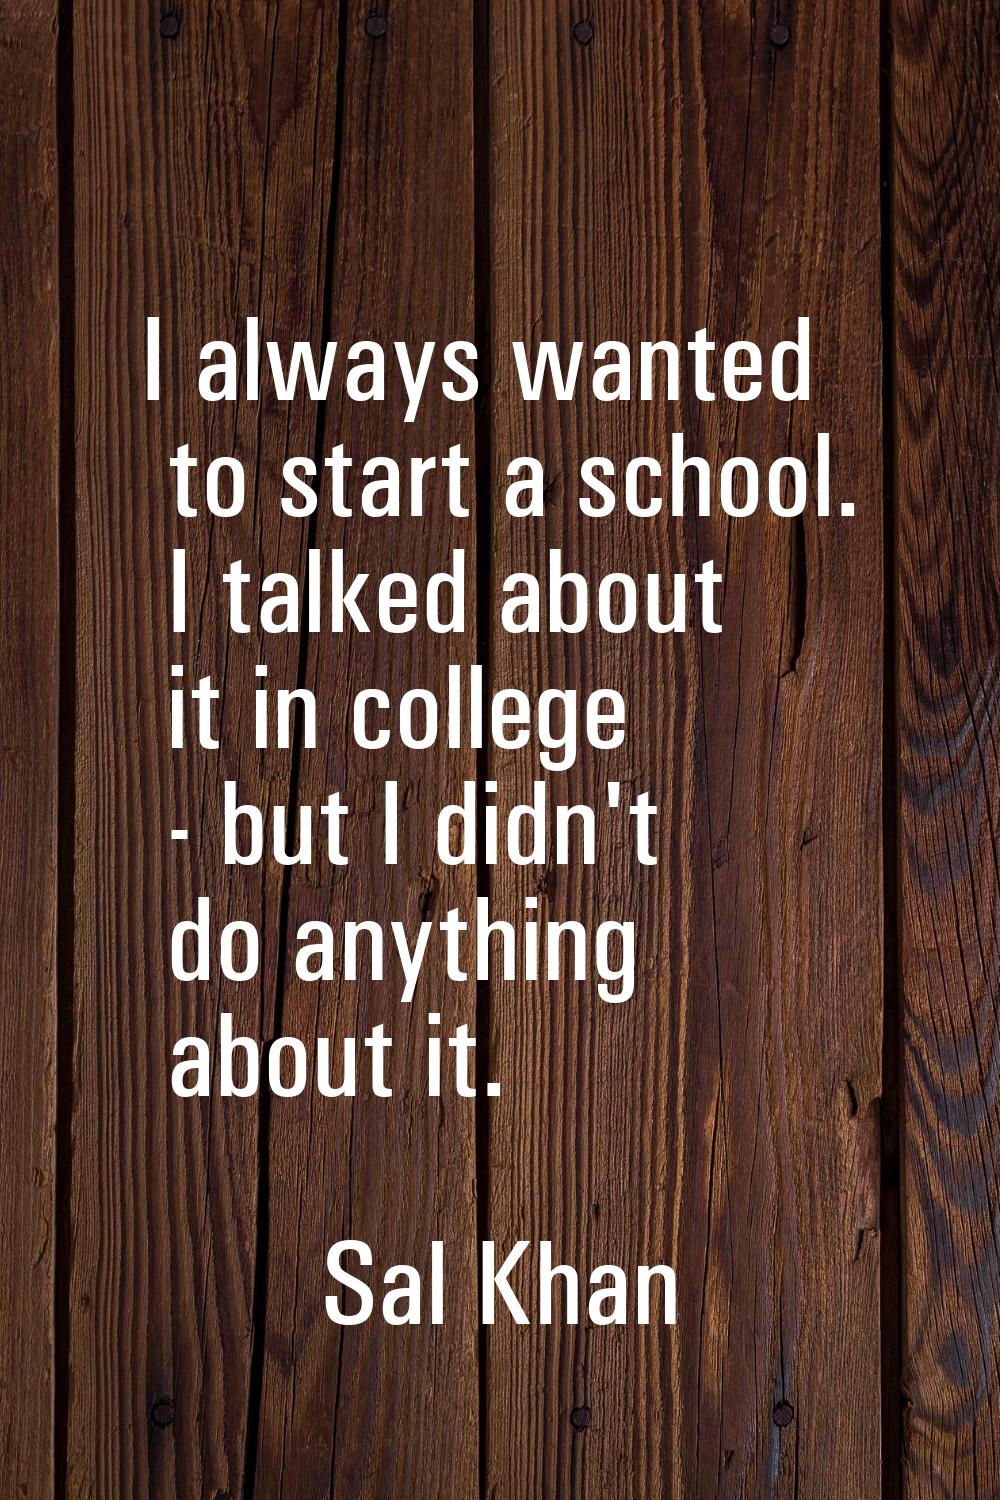 I always wanted to start a school. I talked about it in college - but I didn't do anything about it